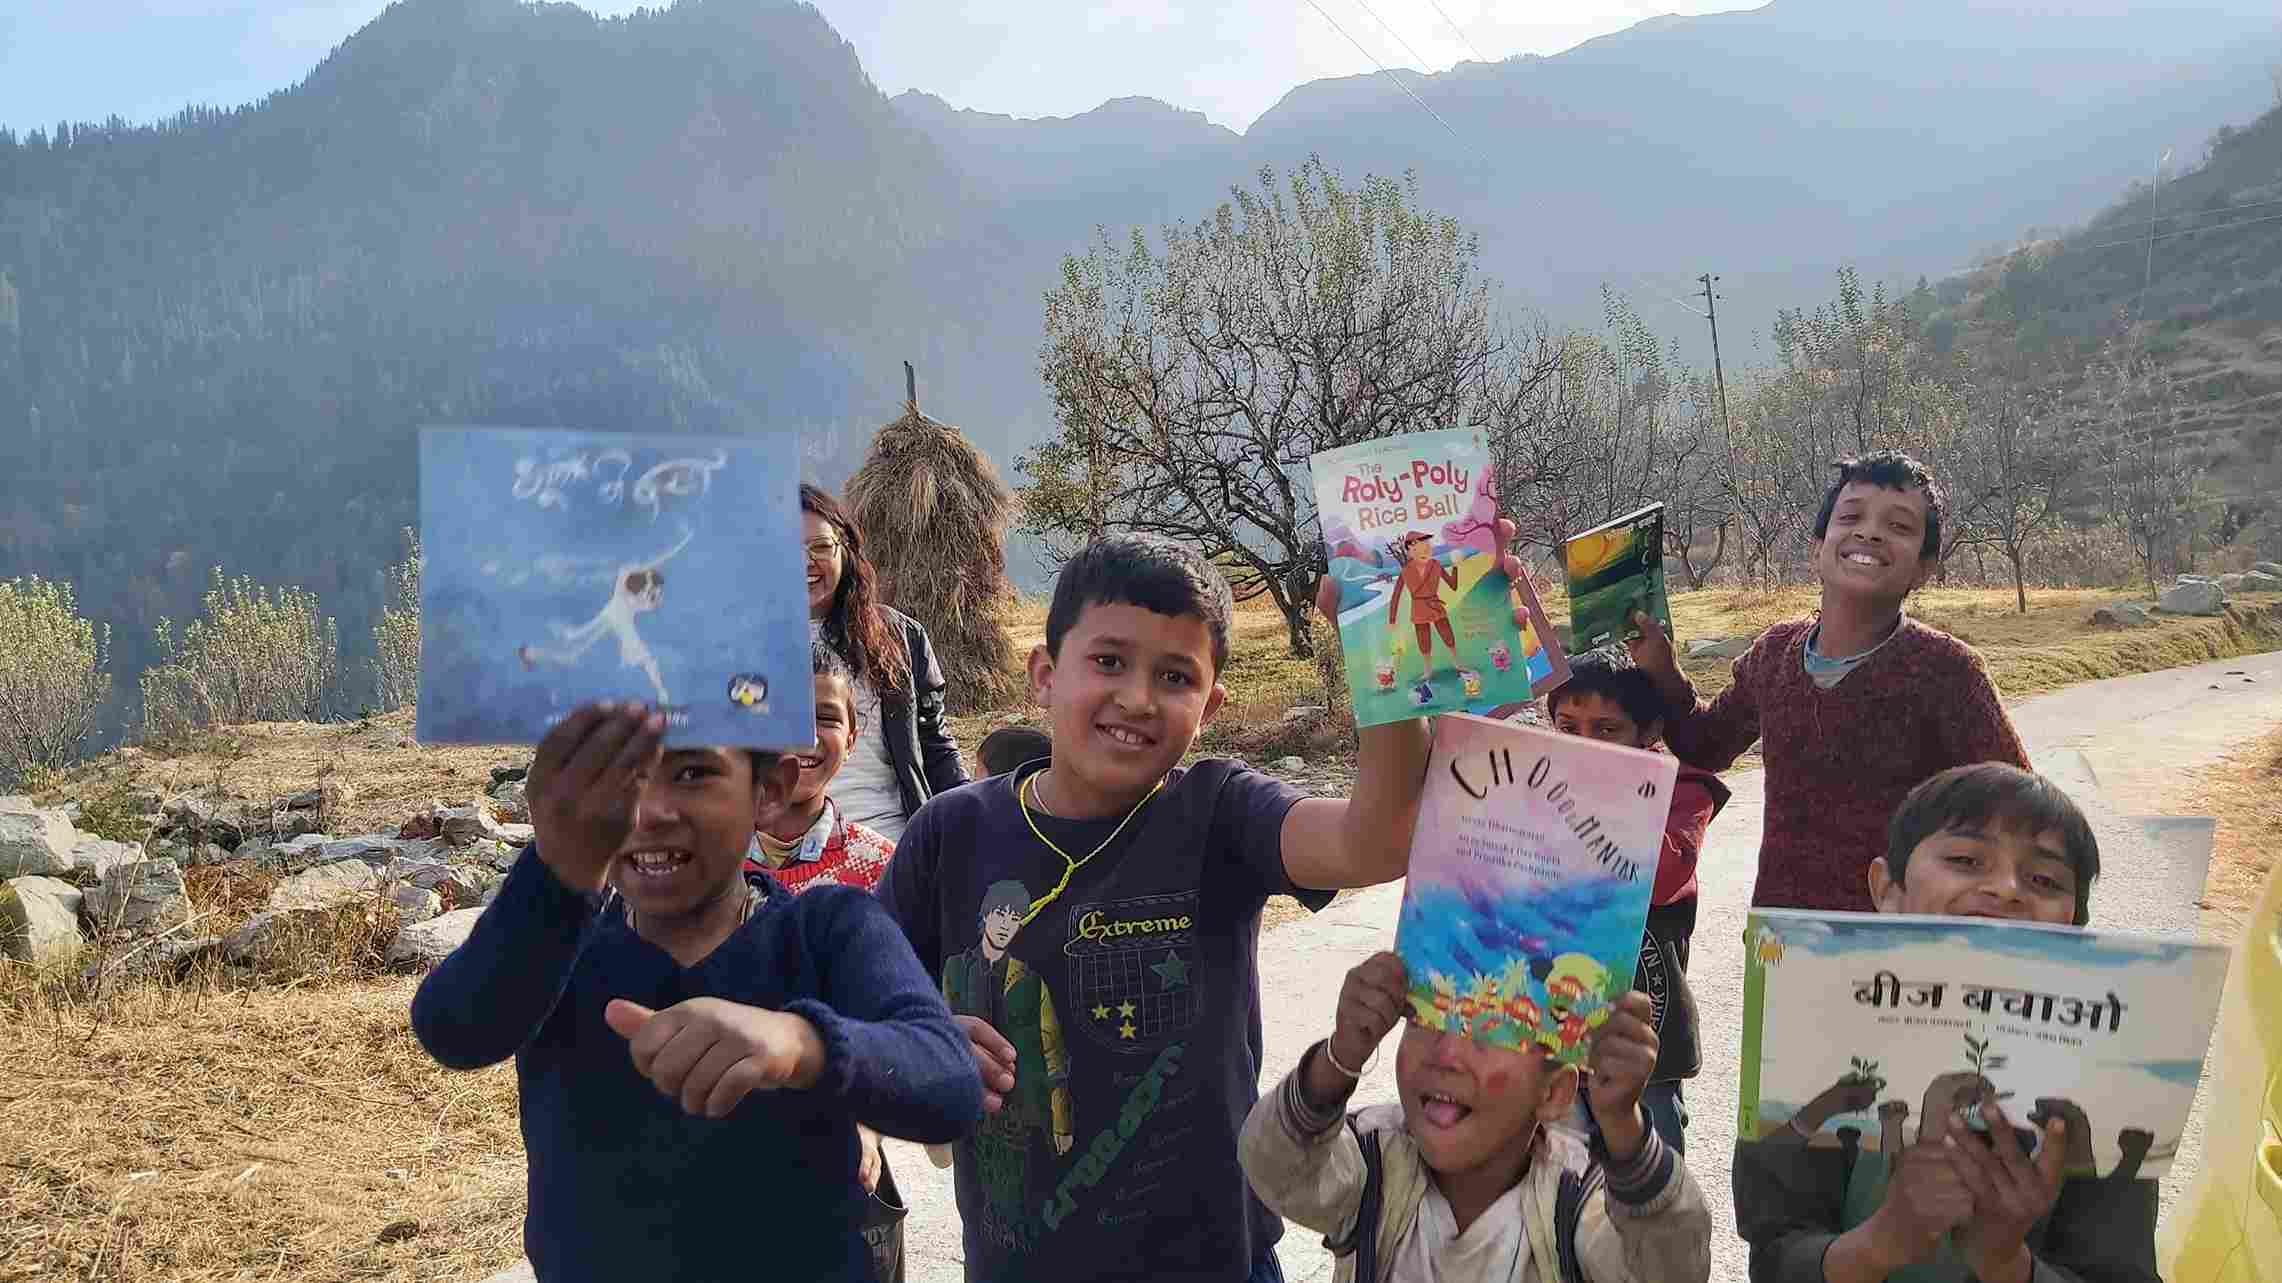 The duo have distributed over 2000 books as part of Kahani ki Dukaan